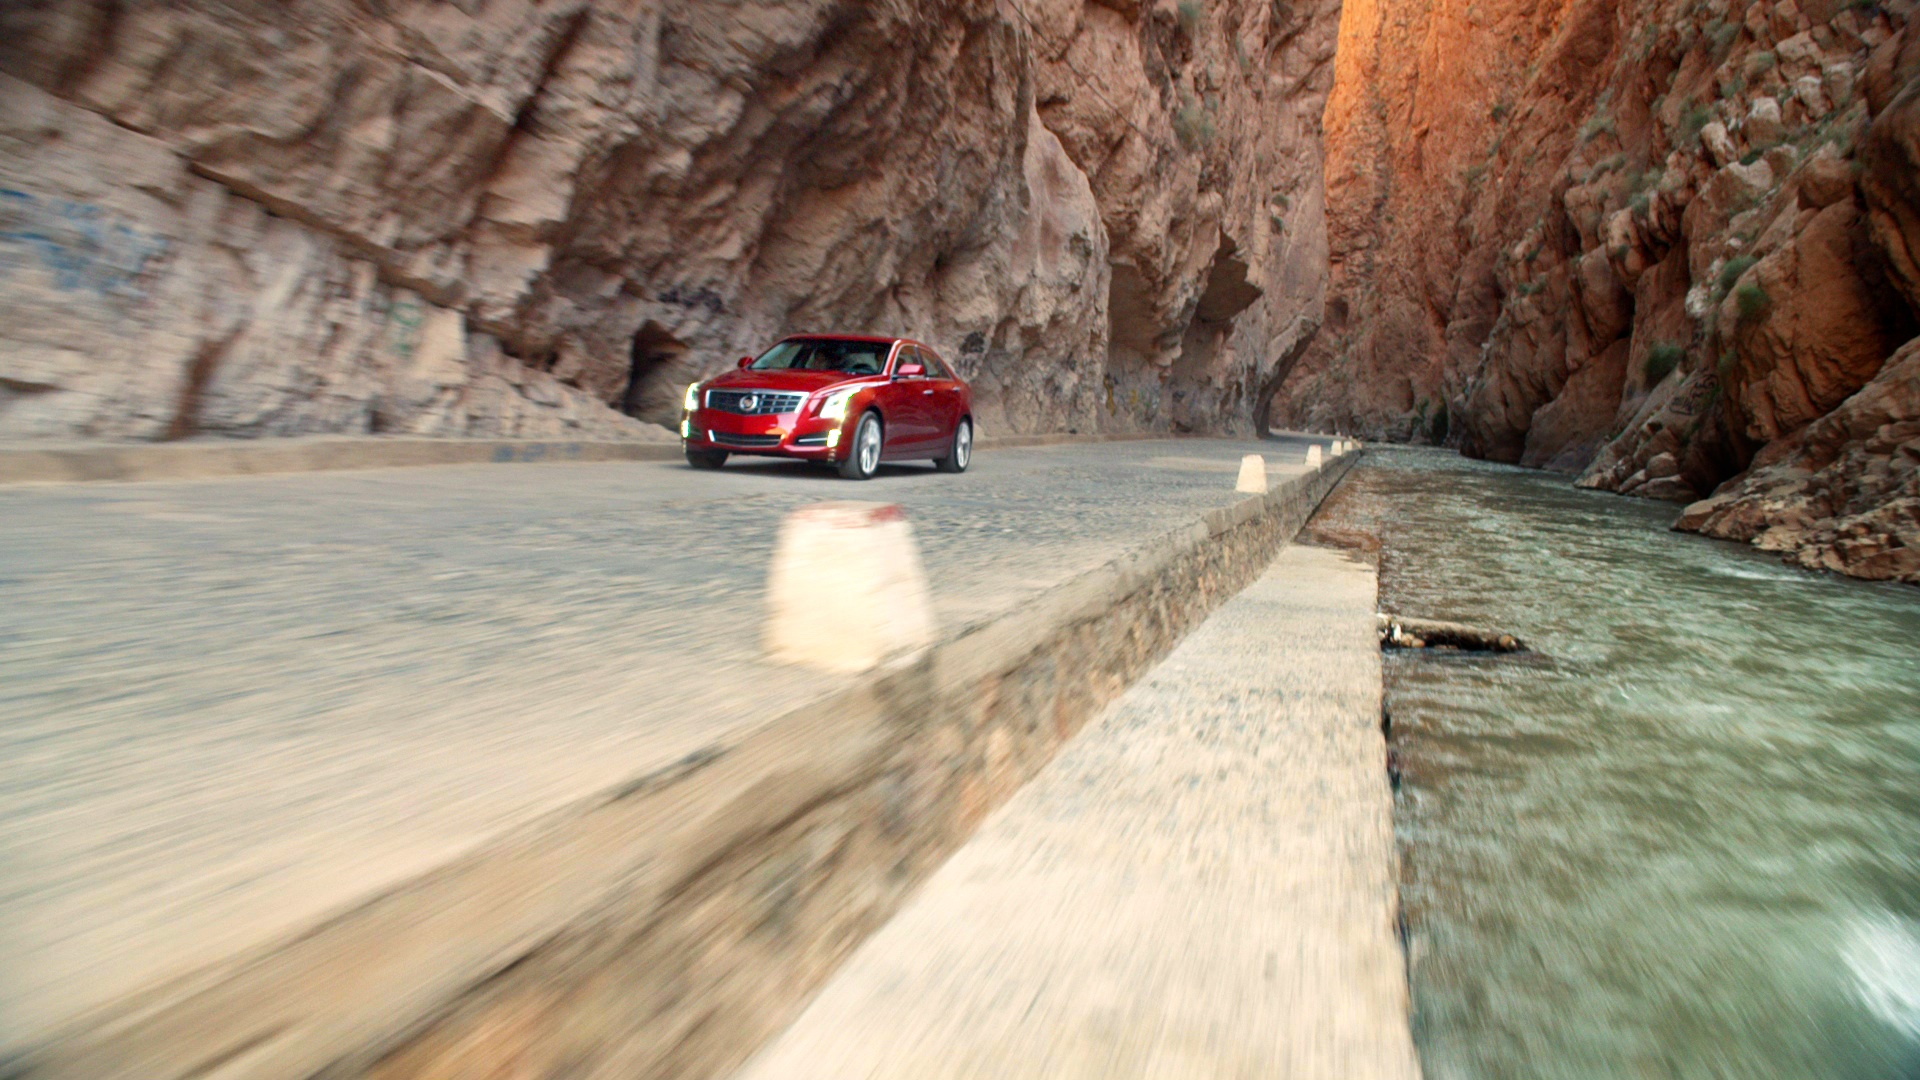 Still images from Cadillac ATS vs The World